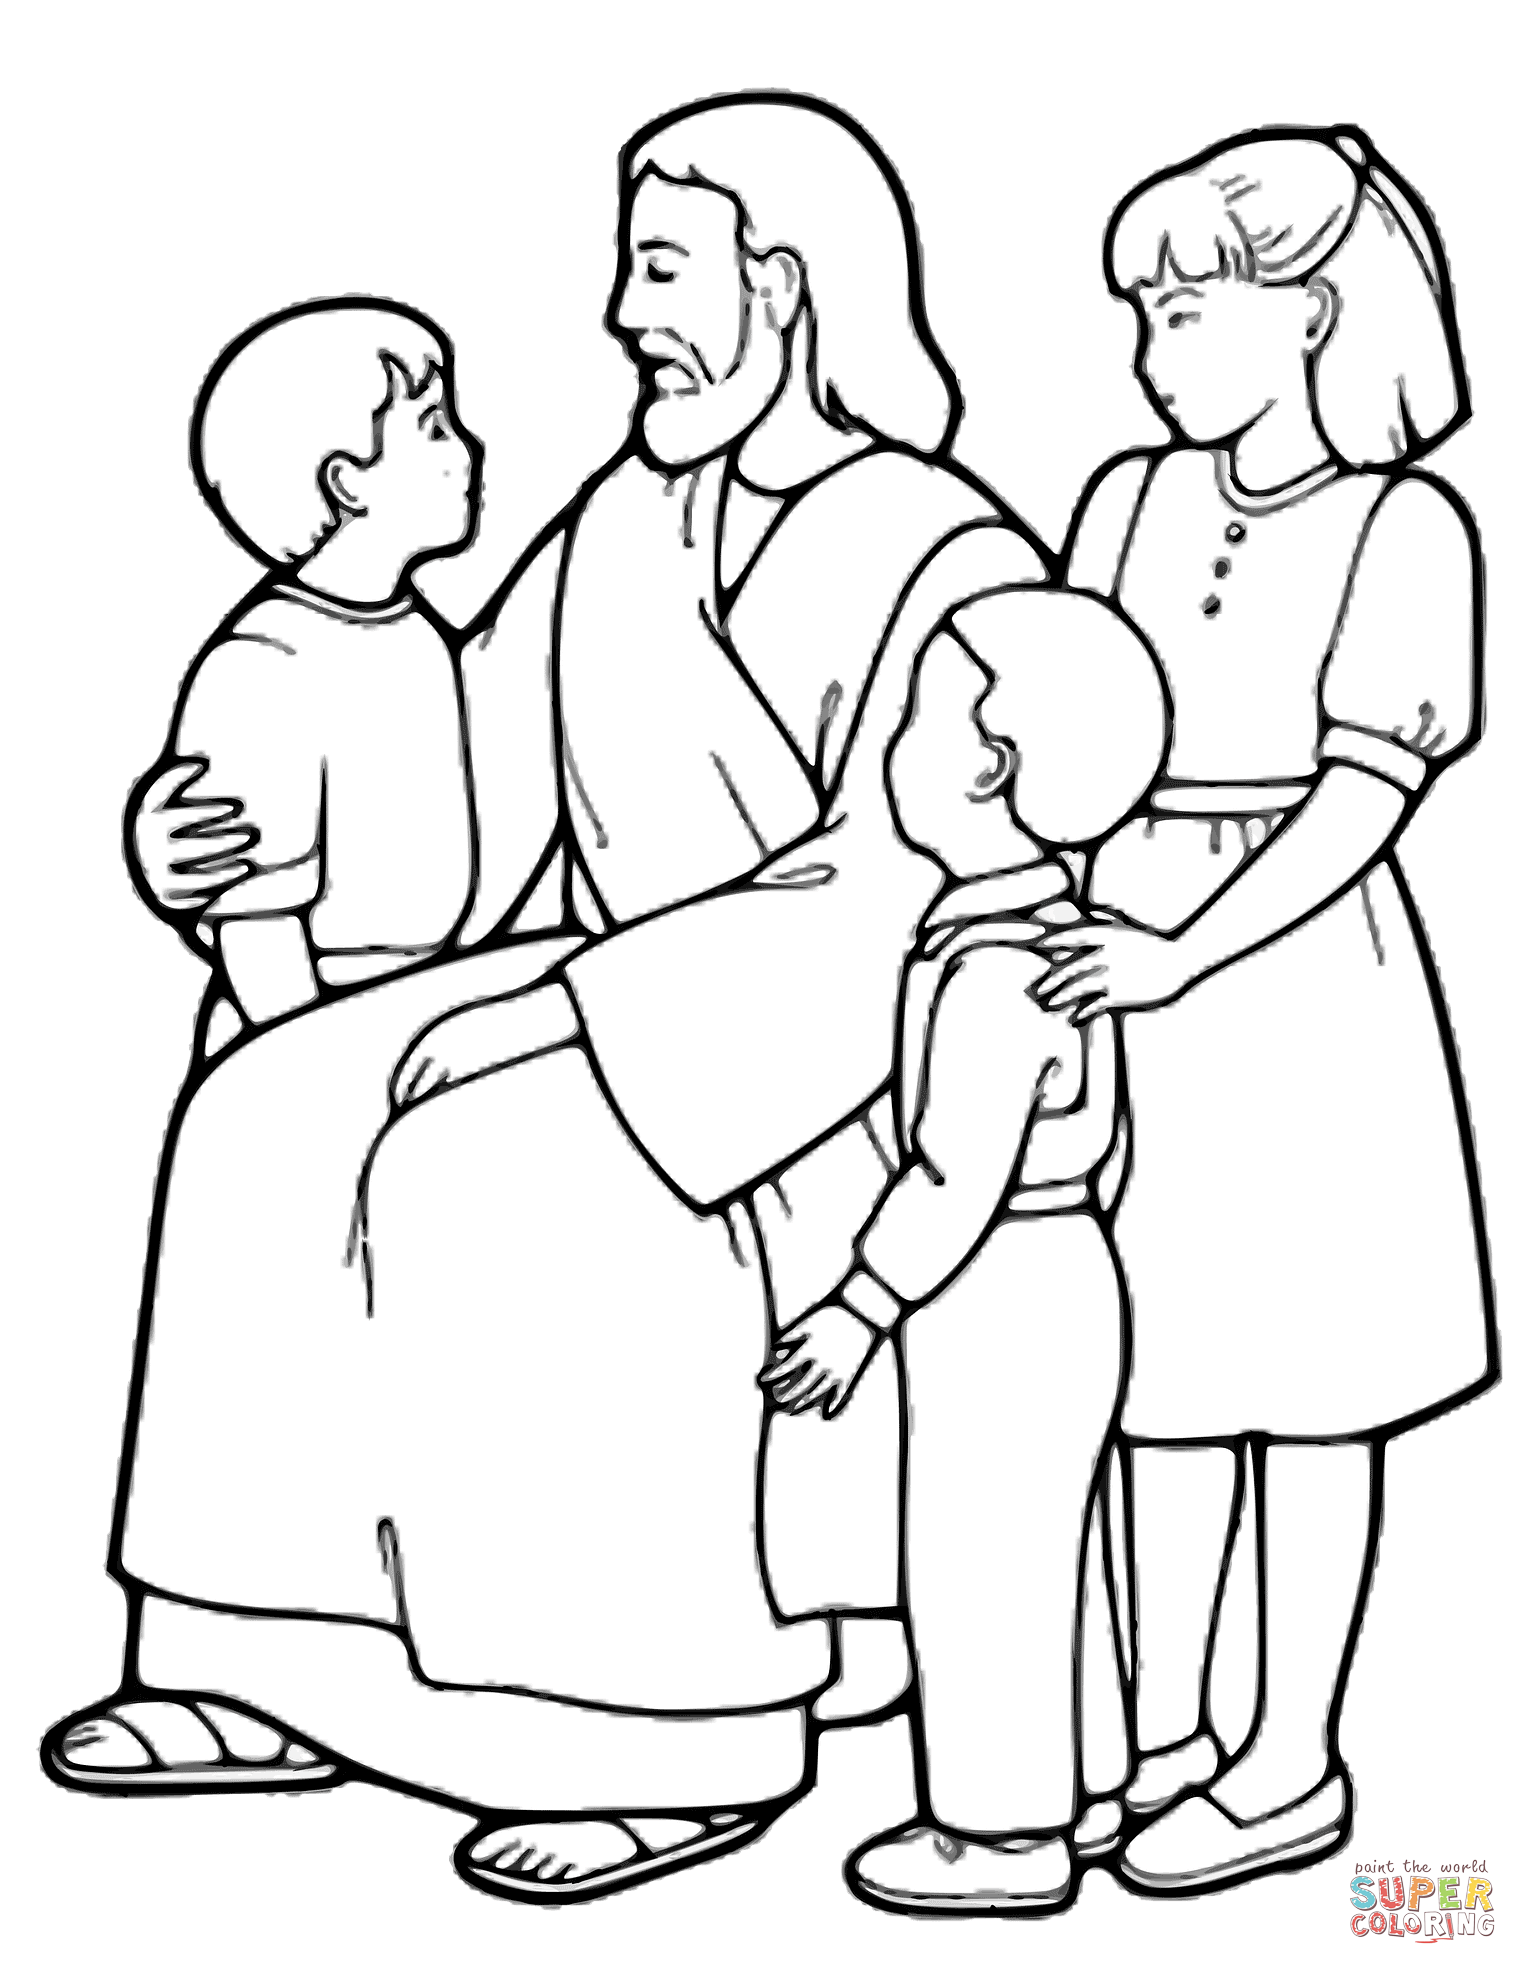 The Little Children and Jesus coloring page | Free Printable ...